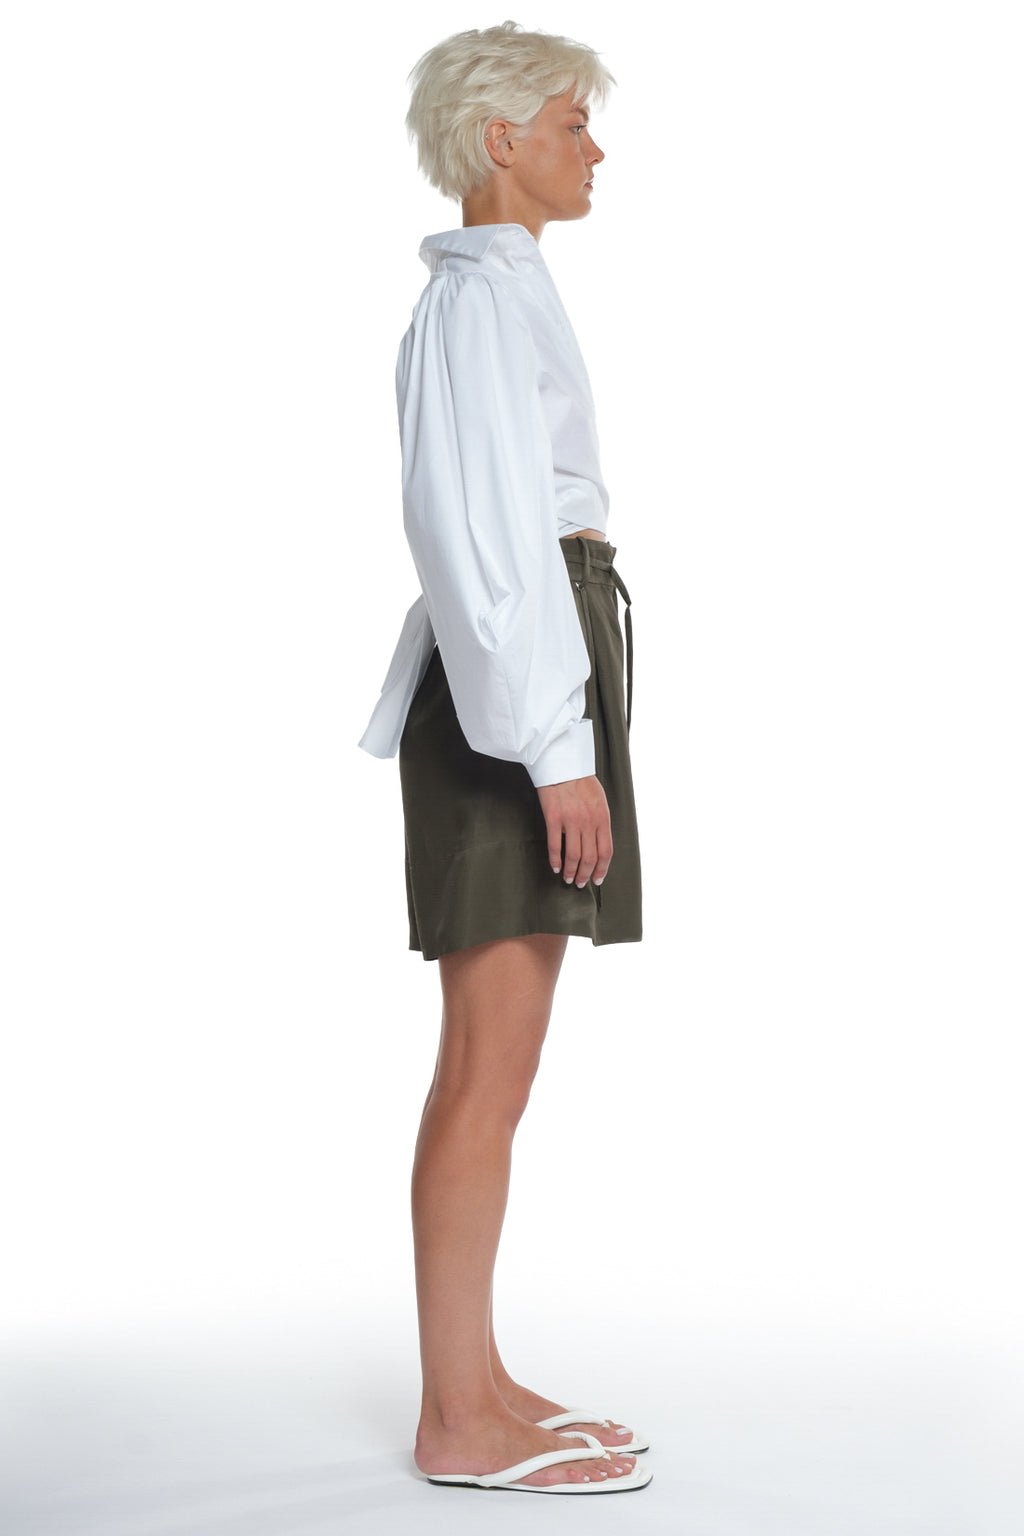 HIGH-WAISTED SHORTS WITH THIN BELT AND DETAILS, ONE POCKET ON THE BACK